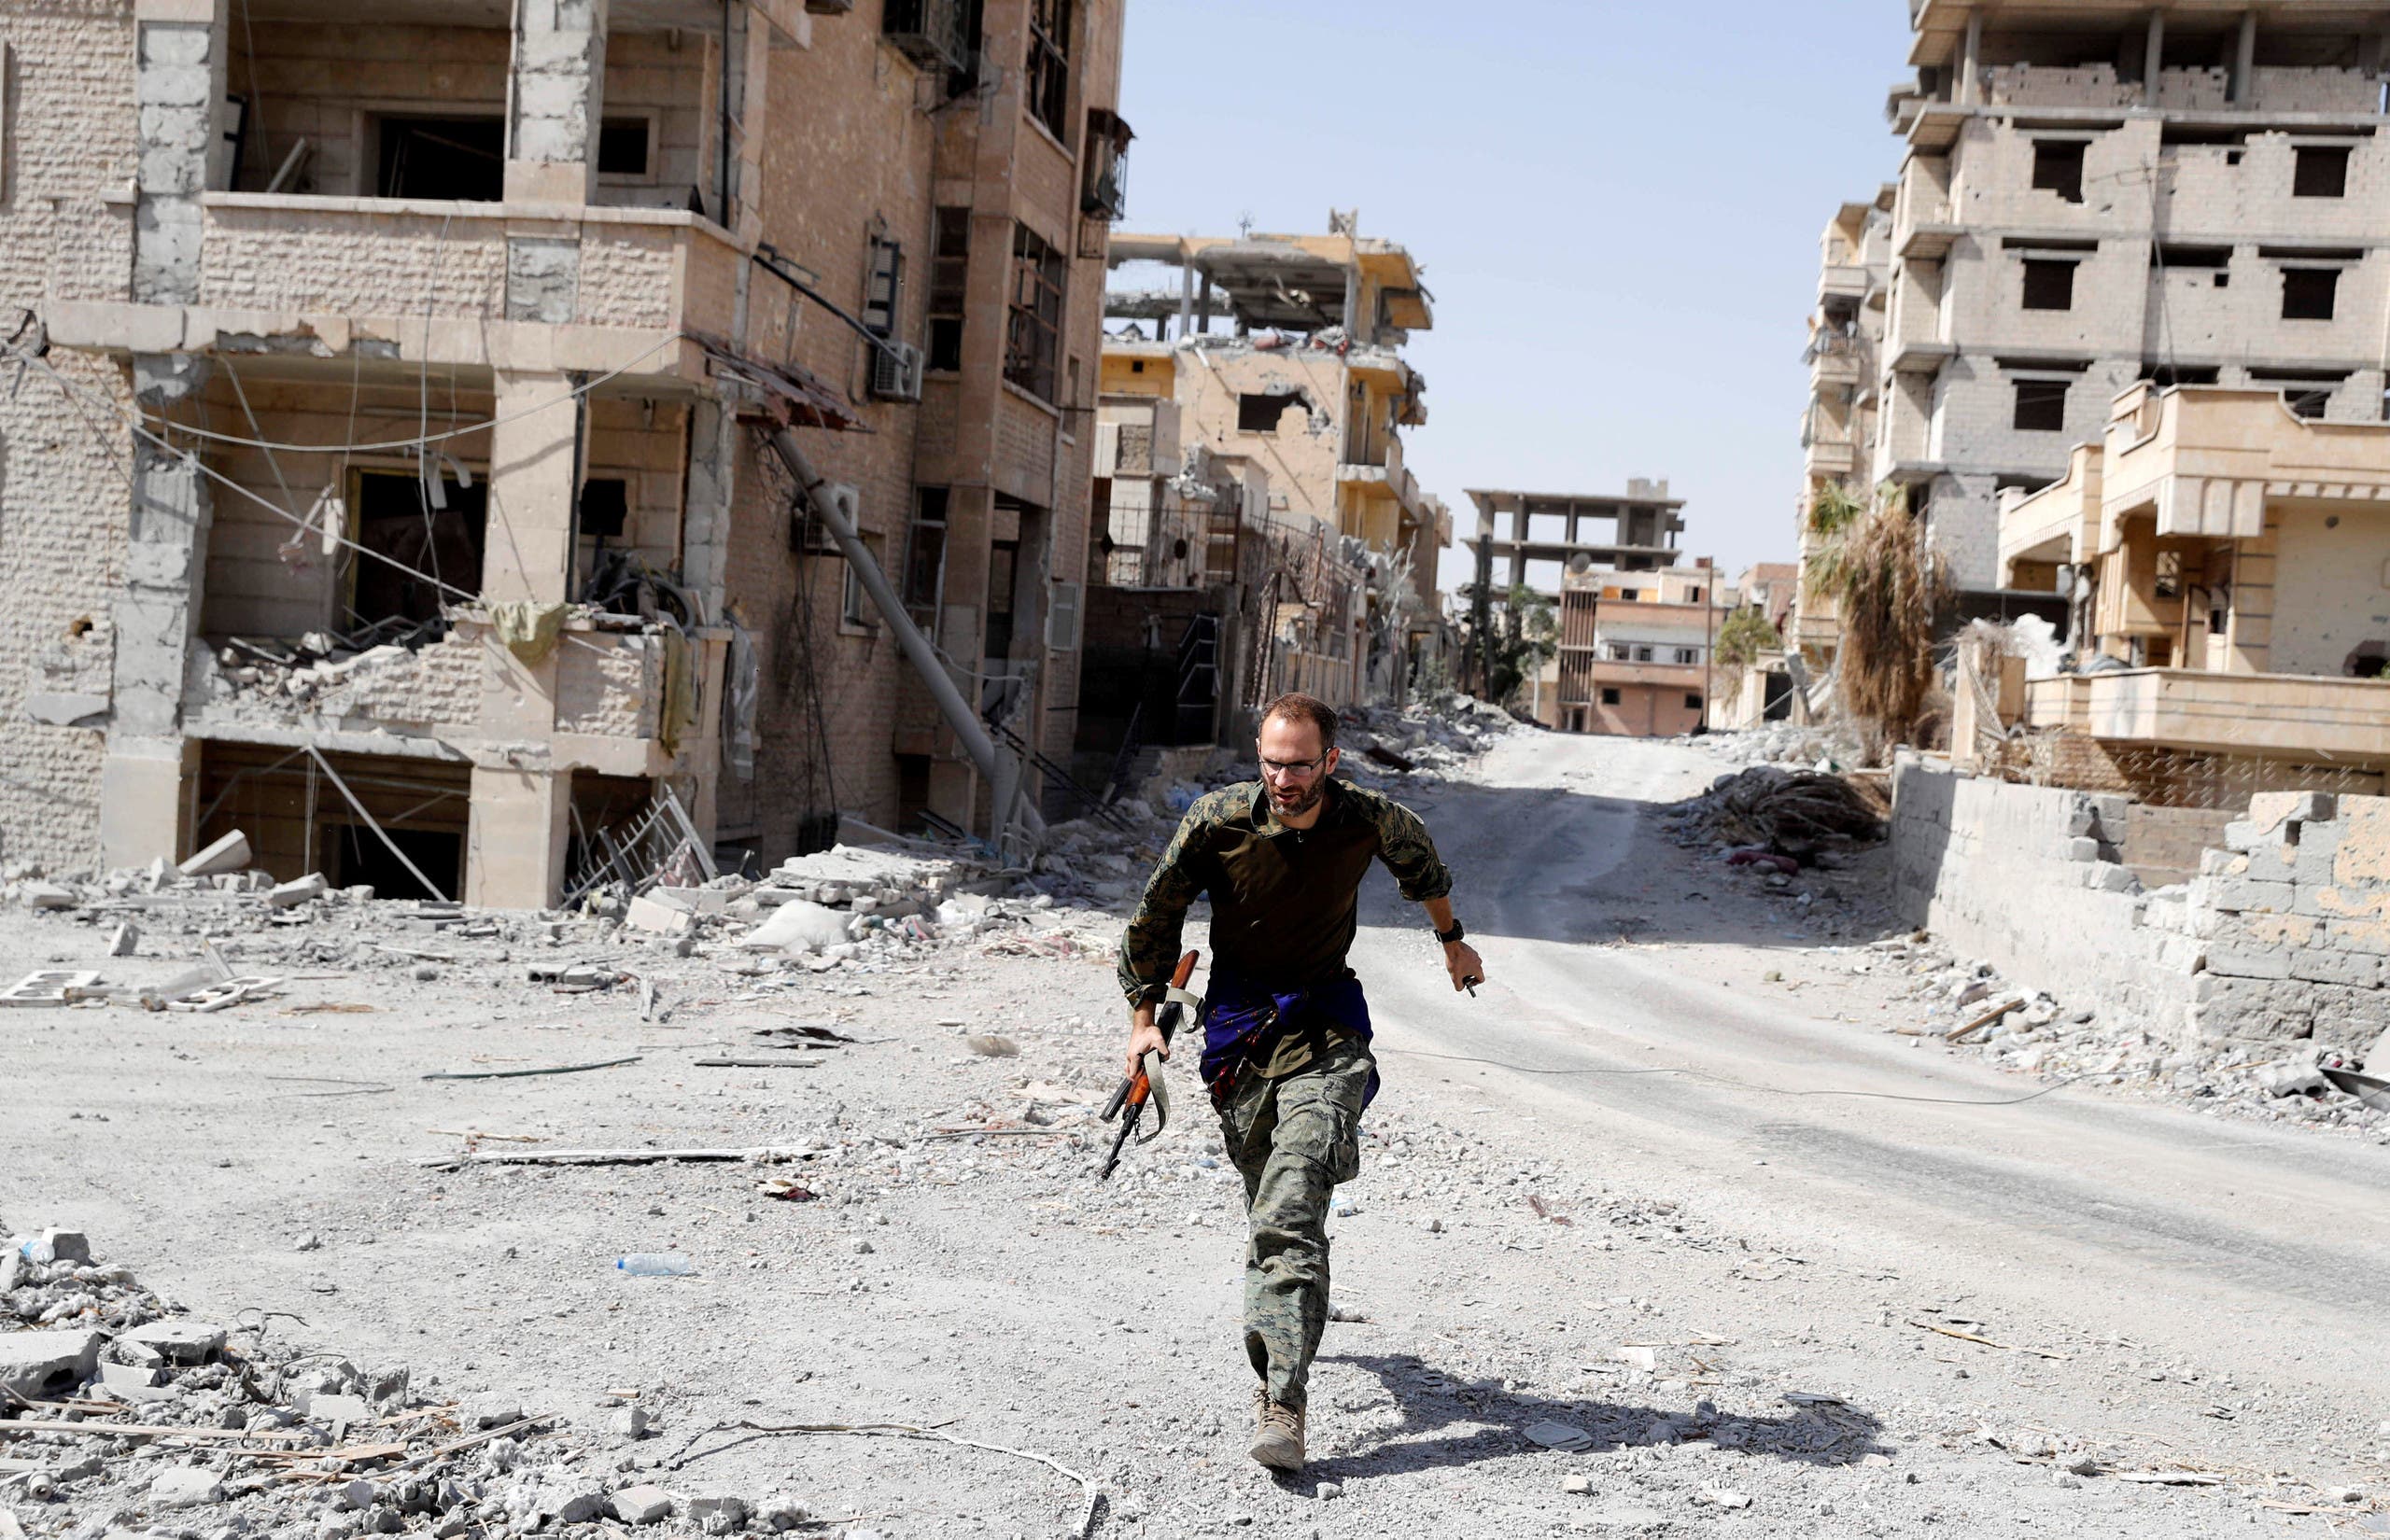 A British volunteer fighter of Syrian Democratic Forces runs for cover to avoid sniper fire of Islamic State militants, at the frontline in Raqqa, Syria October 7, 2017. REUTERS/